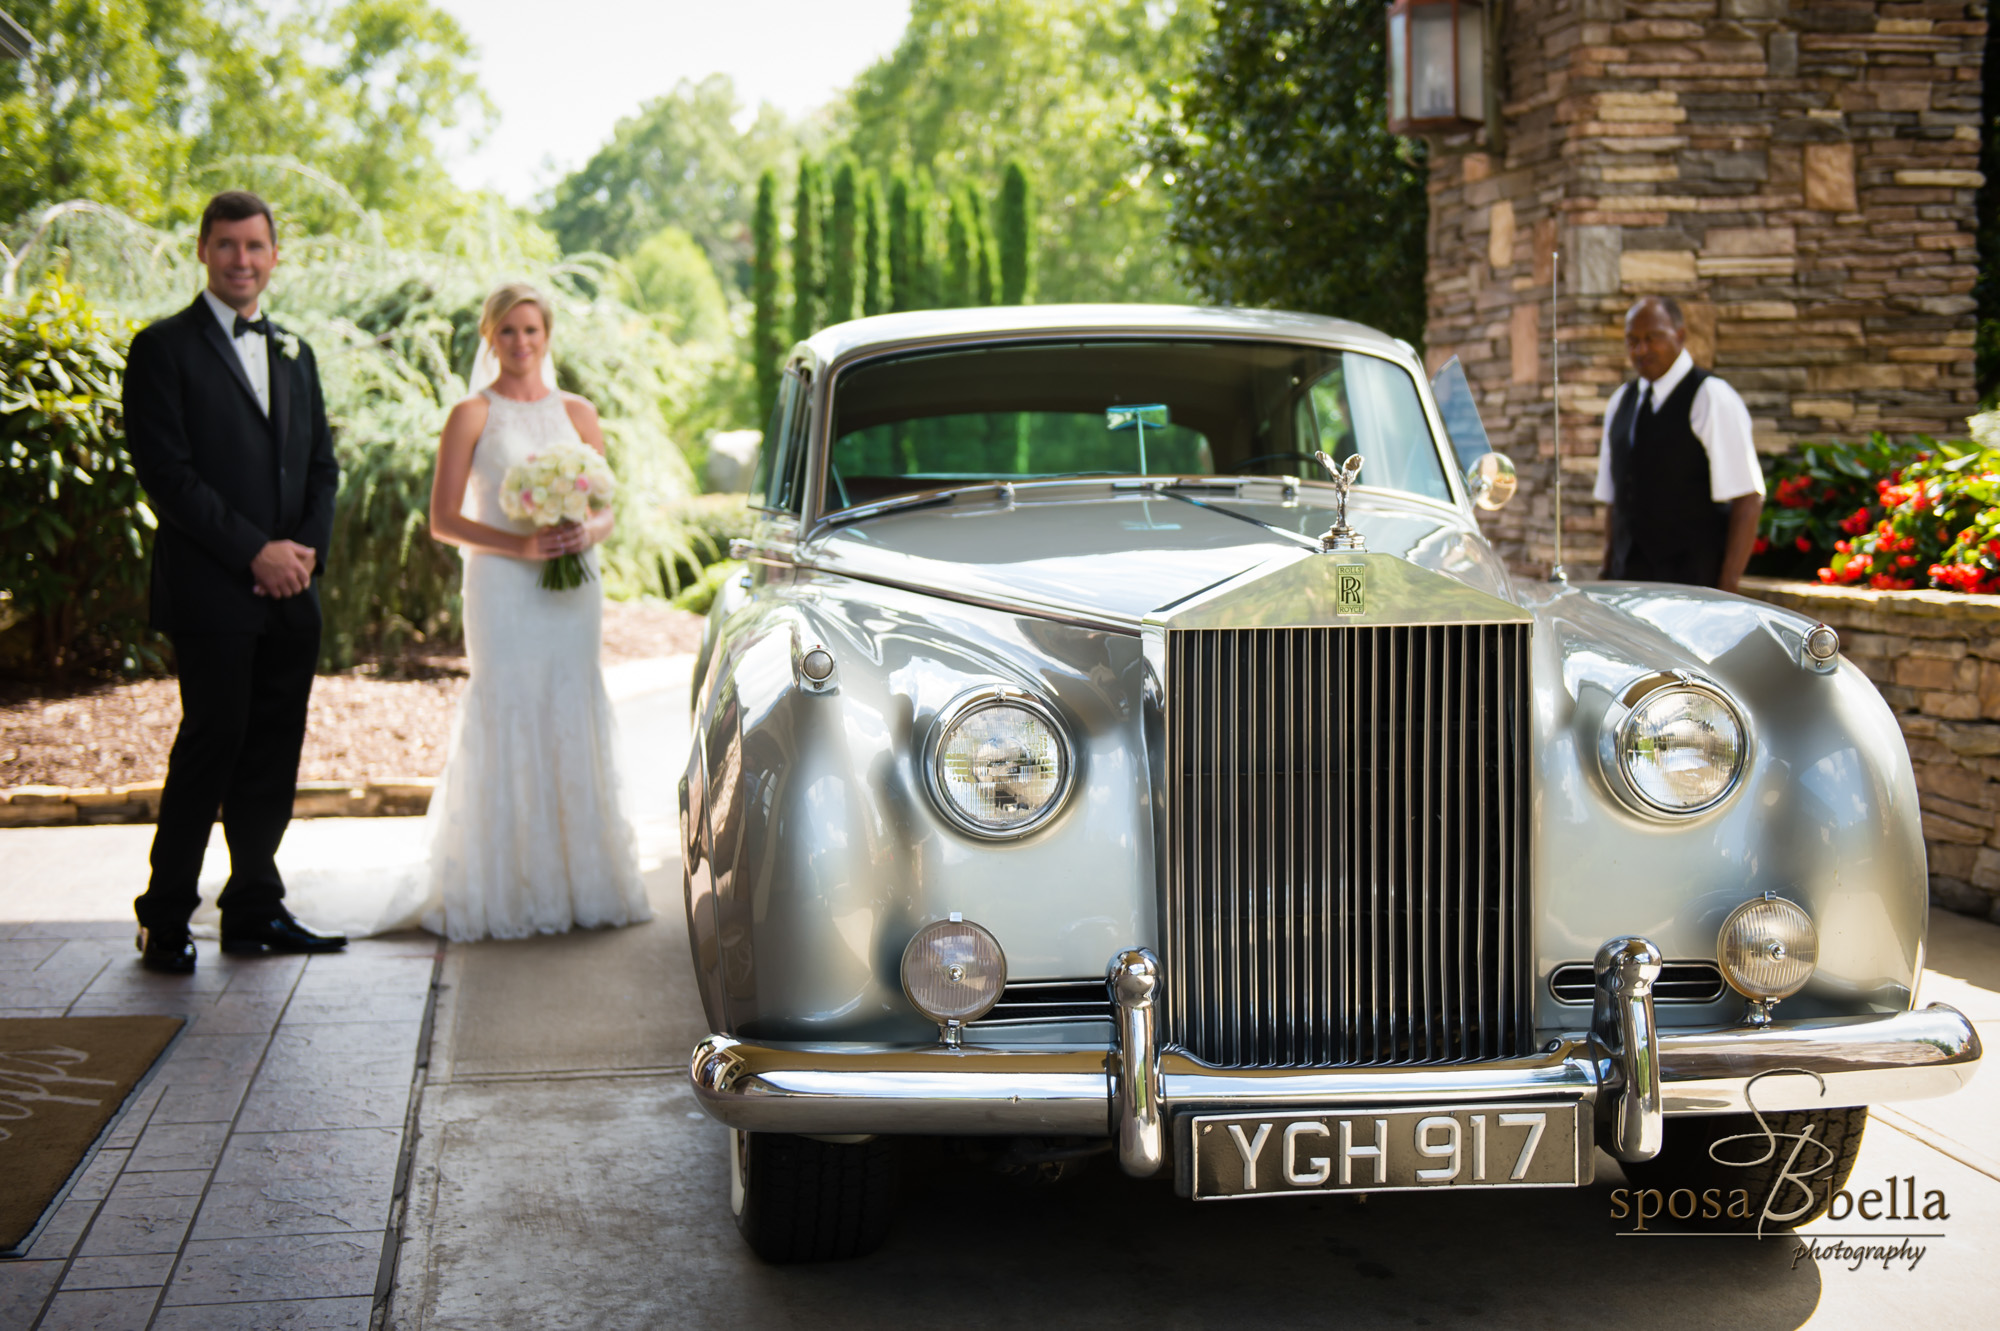  A classic Rolls Royce took Courtney to the chapel before the ceremony. After saying their vows, it brought her &amp; Chris down to the reception. 